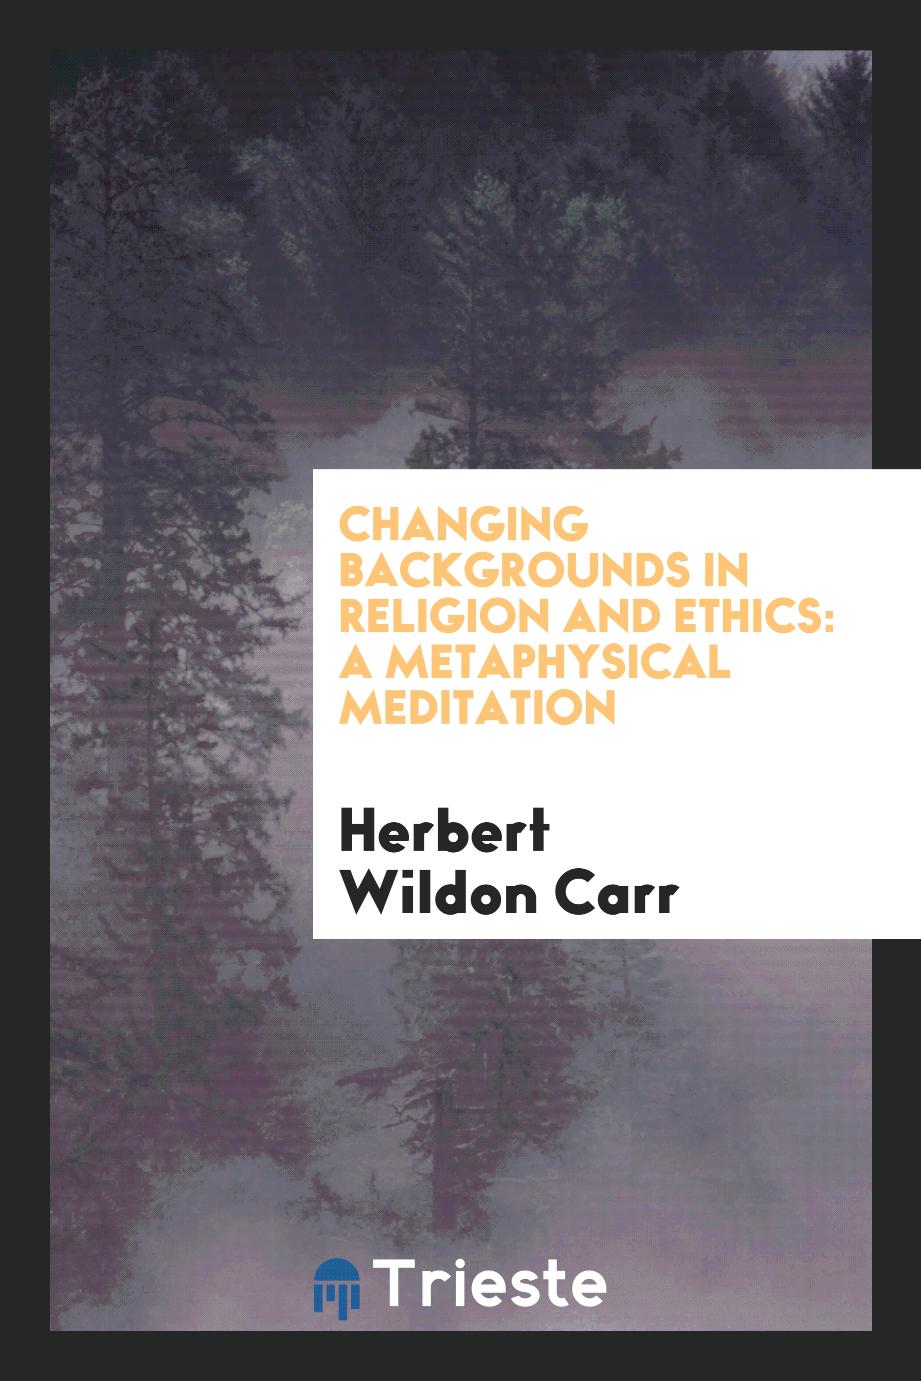 Changing backgrounds in religion and ethics: a metaphysical meditation